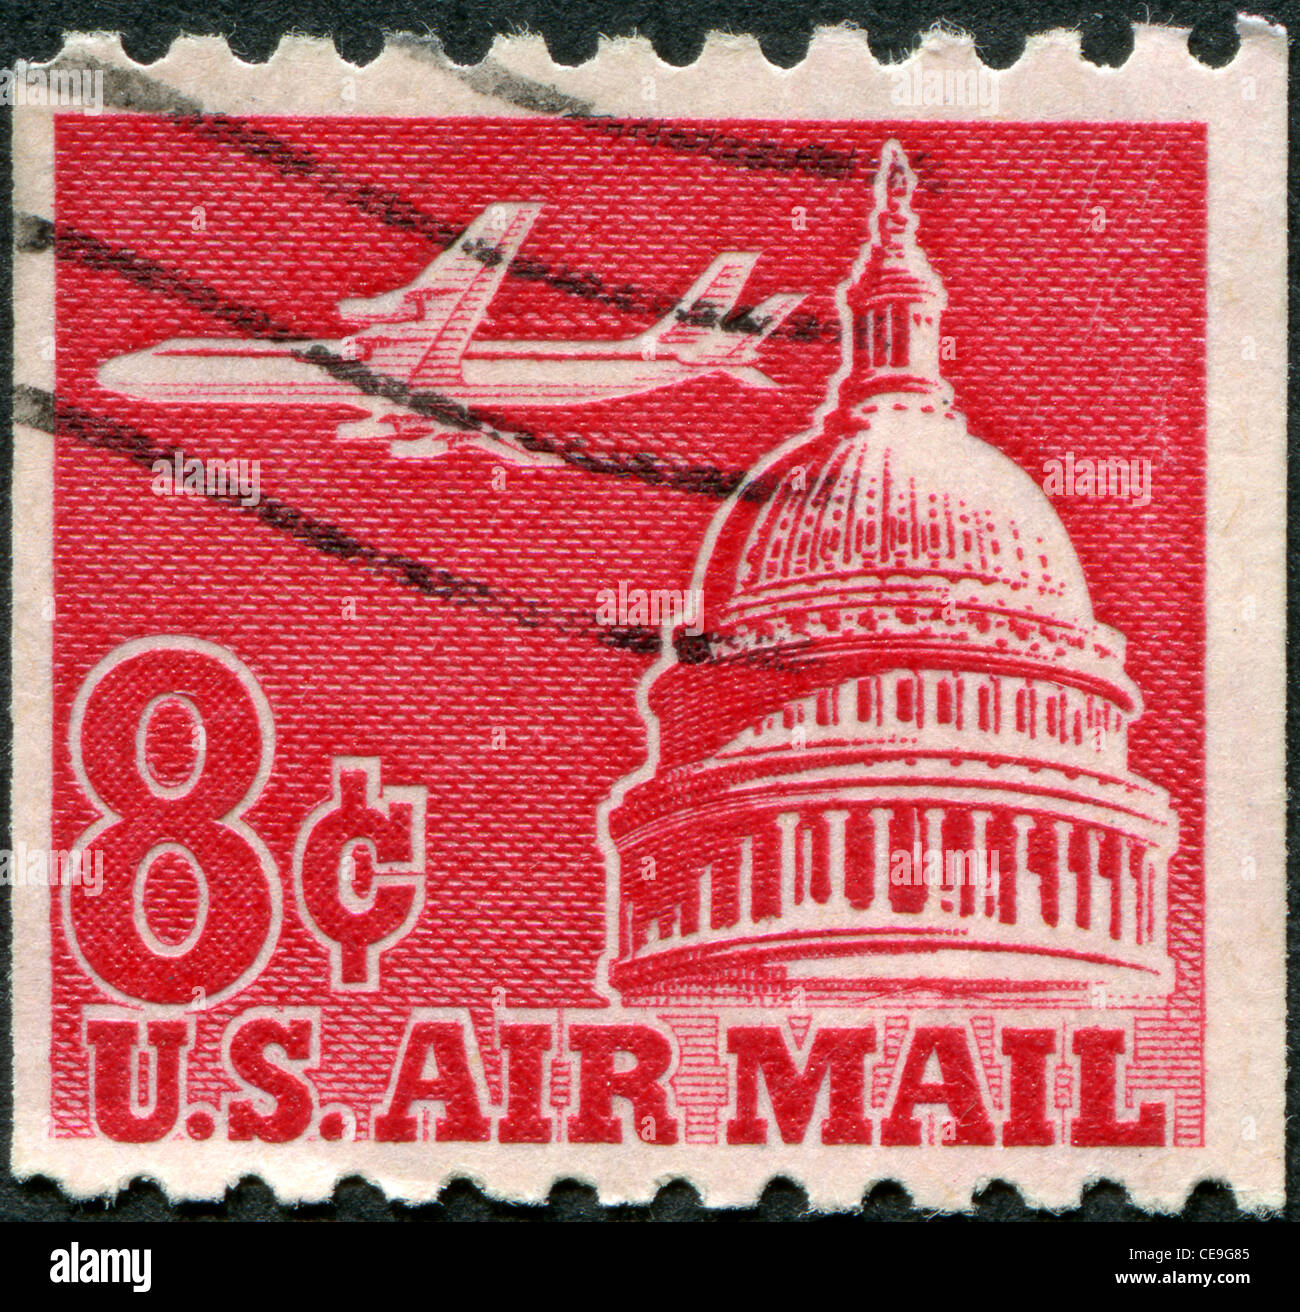 USA - CIRCA 1962: A stamp printed in the USA, shows a Jet Airliner (Douglas DC-8) over Capitol, circa 1962 Stock Photo